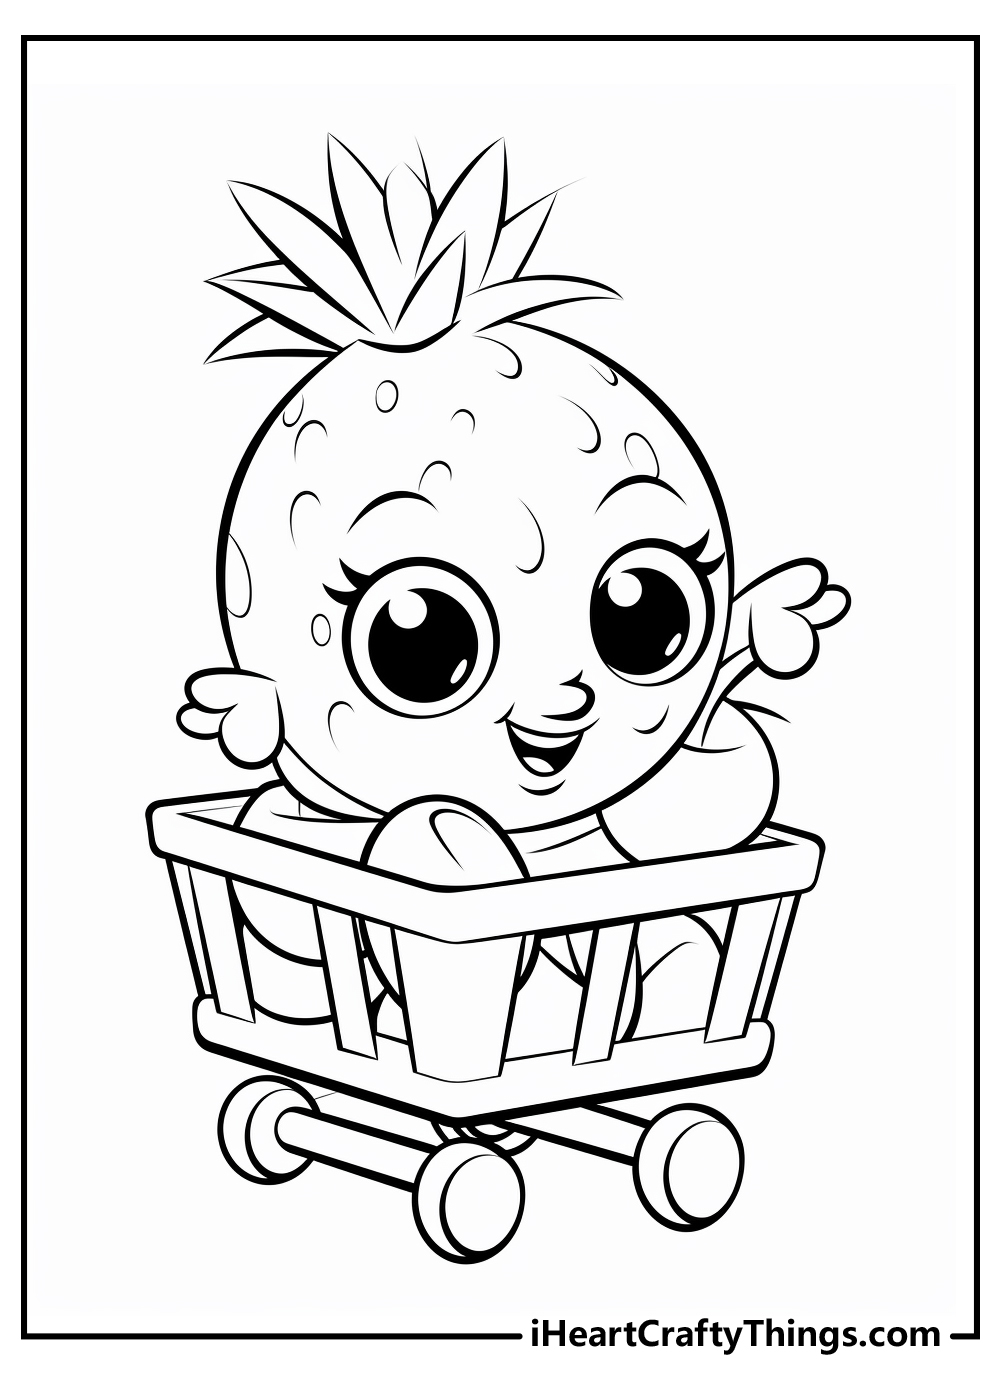 black-and-white shopkins coloring sheet